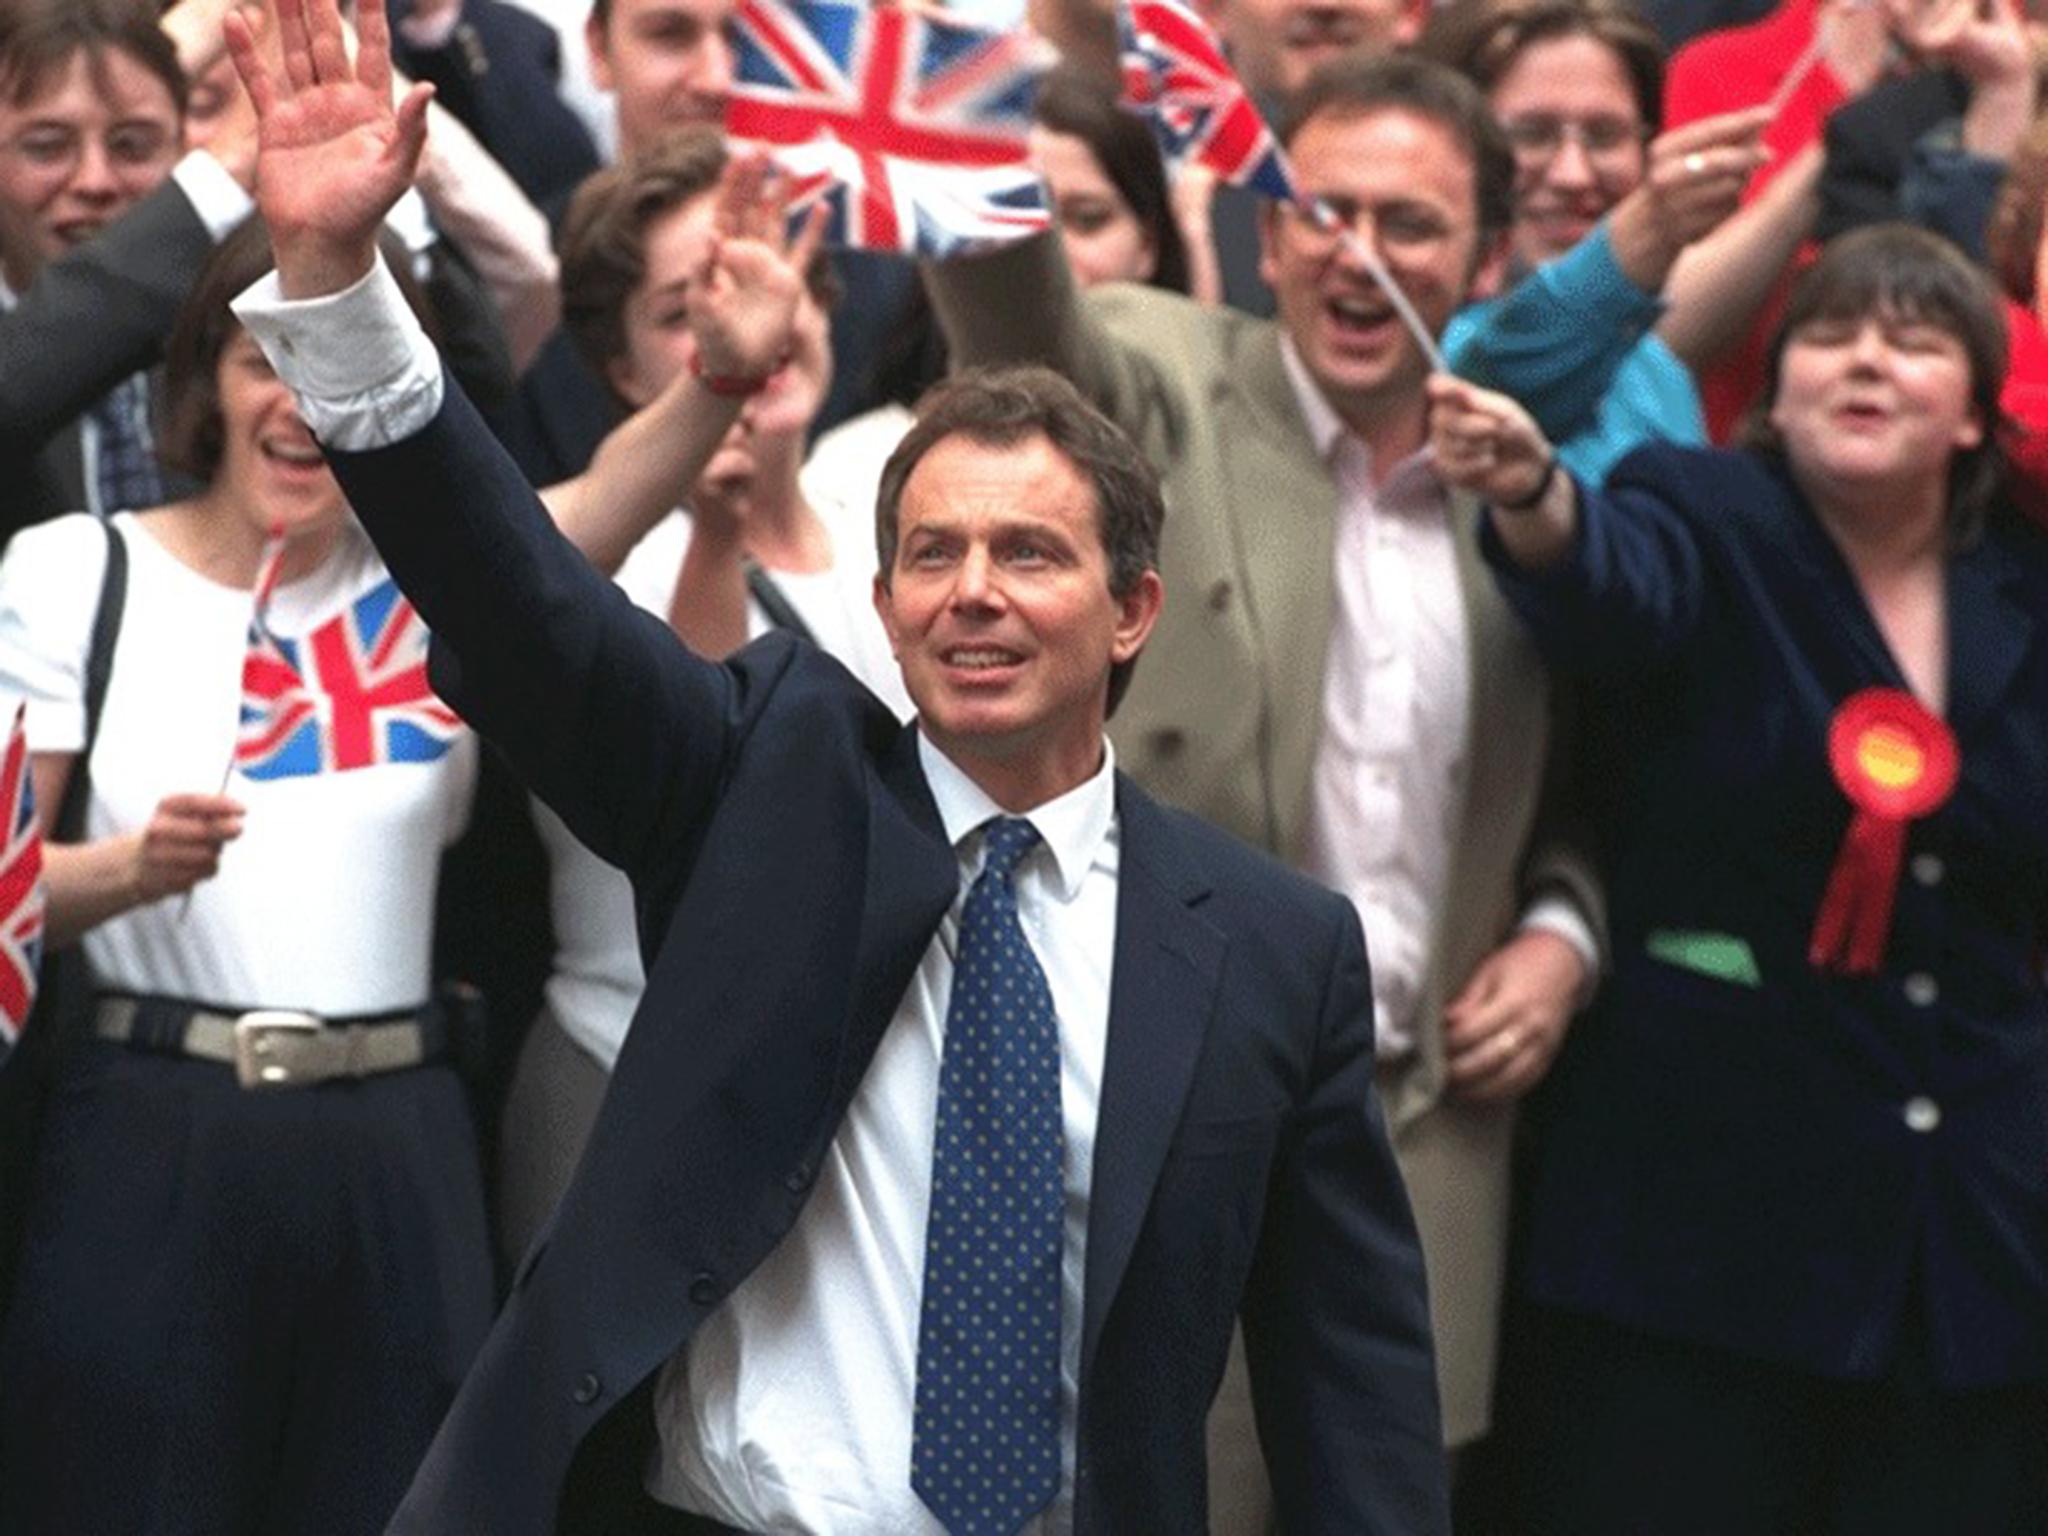 1 May marks the anniversary of New Labour's landslide victory in the 1997 election